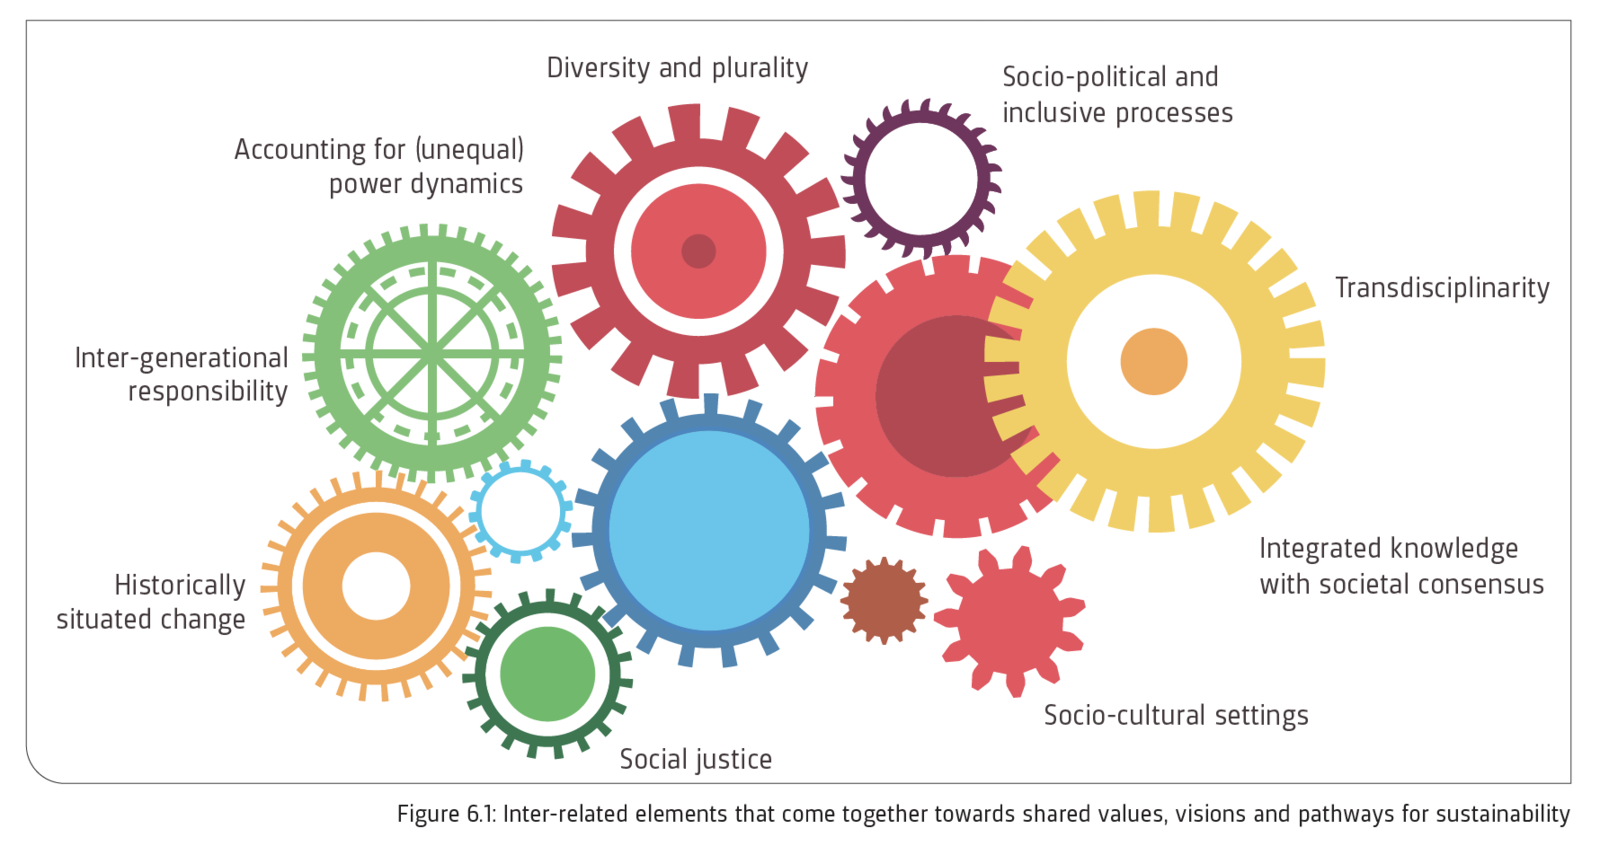 Figure 6.1: Inter-related elements that come together towards shared values, visions and pathways for sustainability